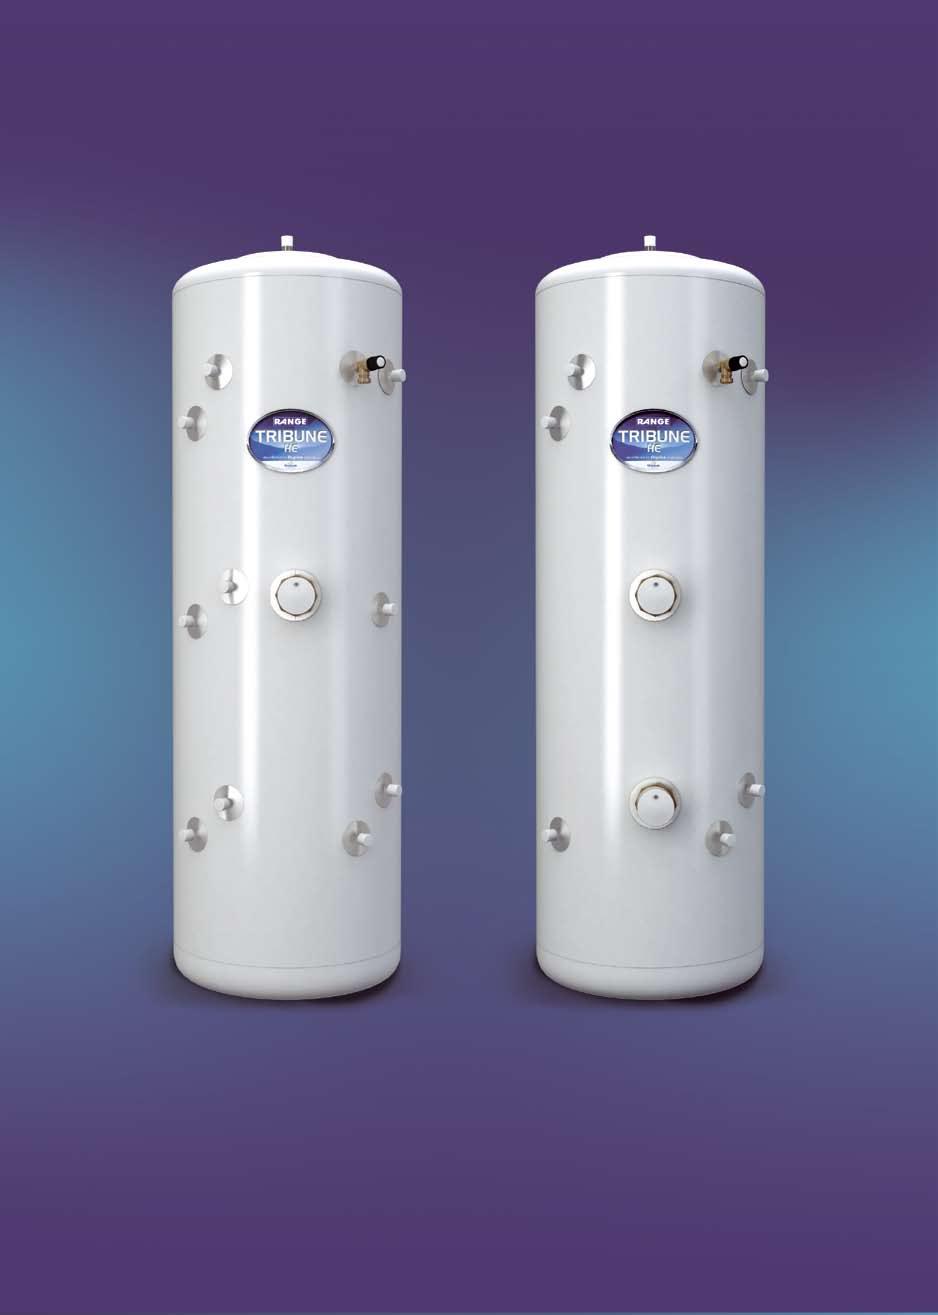 Range Tribune HE Solar Unvented Direct and Indirect Cylinders Range Tribune HE Solar cylinders have been designed specifically with Solar applications in mind and are based on the highly successful